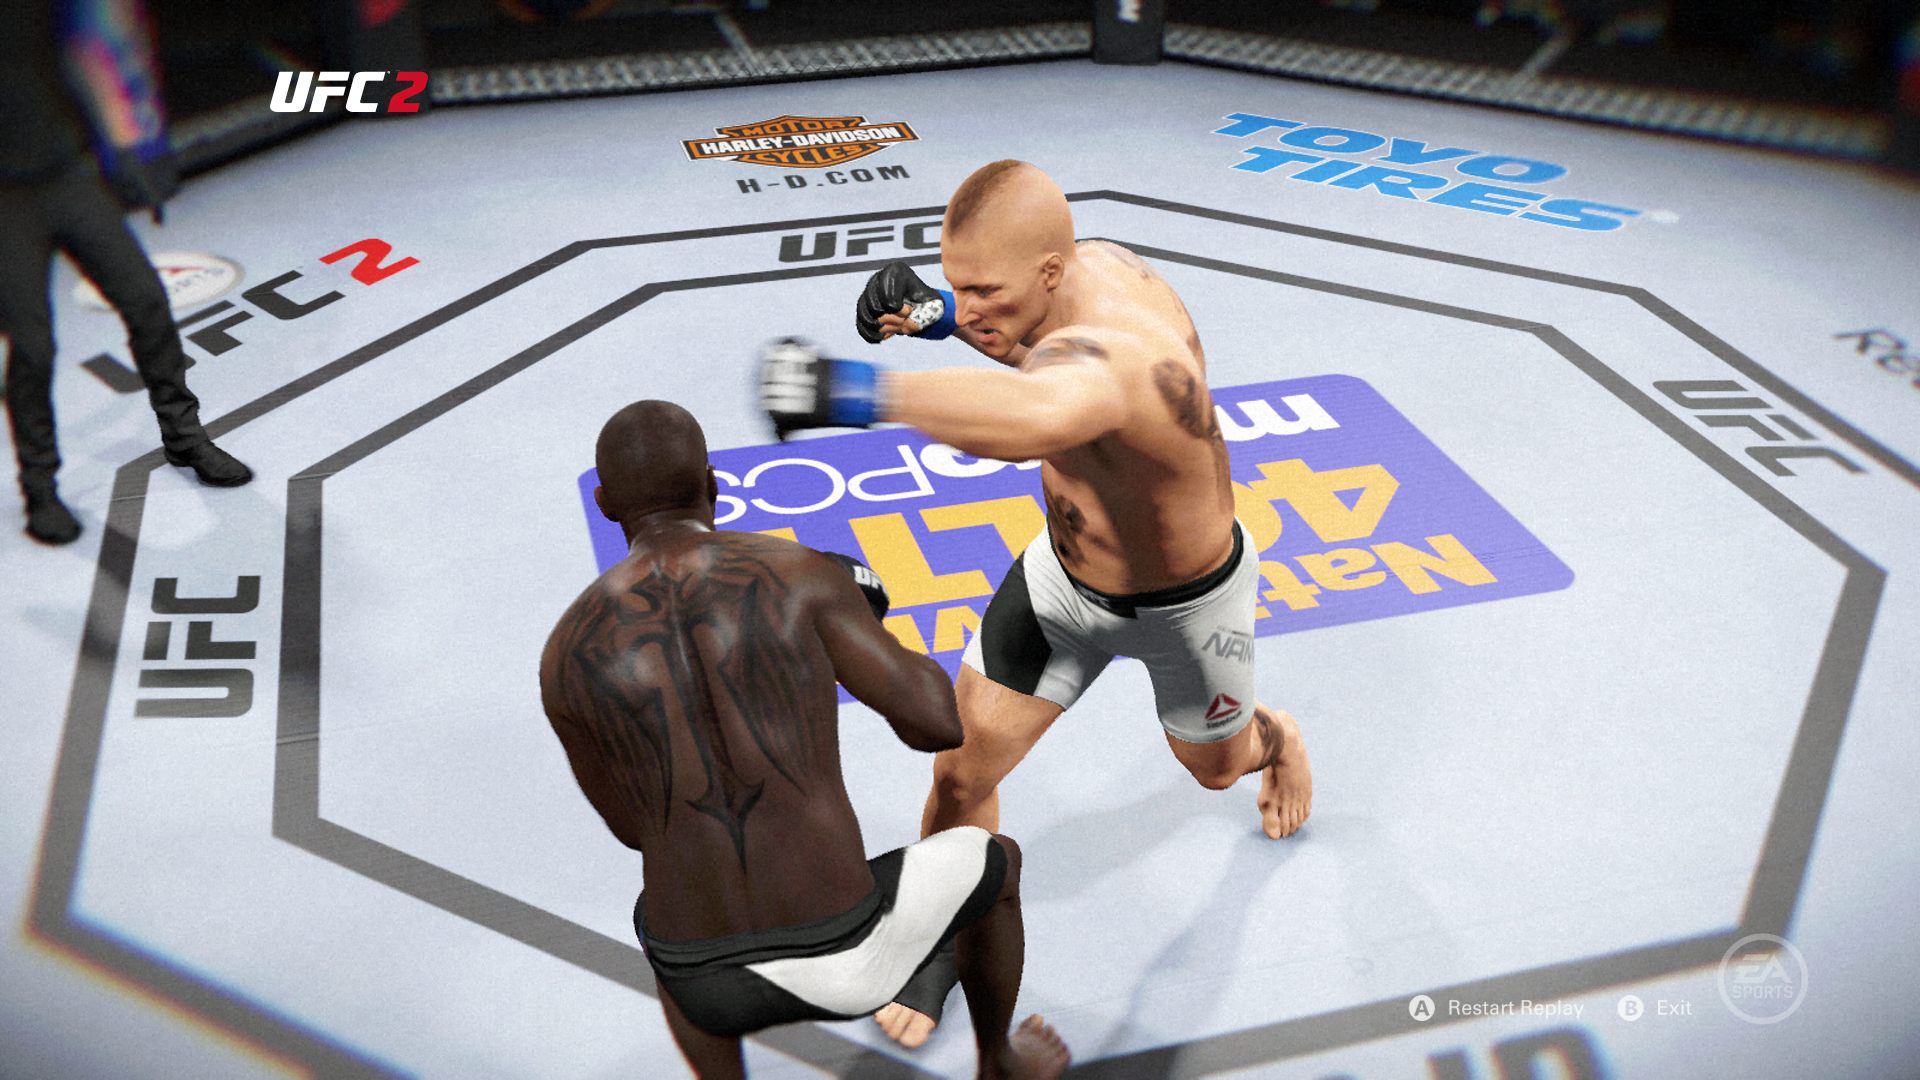 when did ufc 2 come out